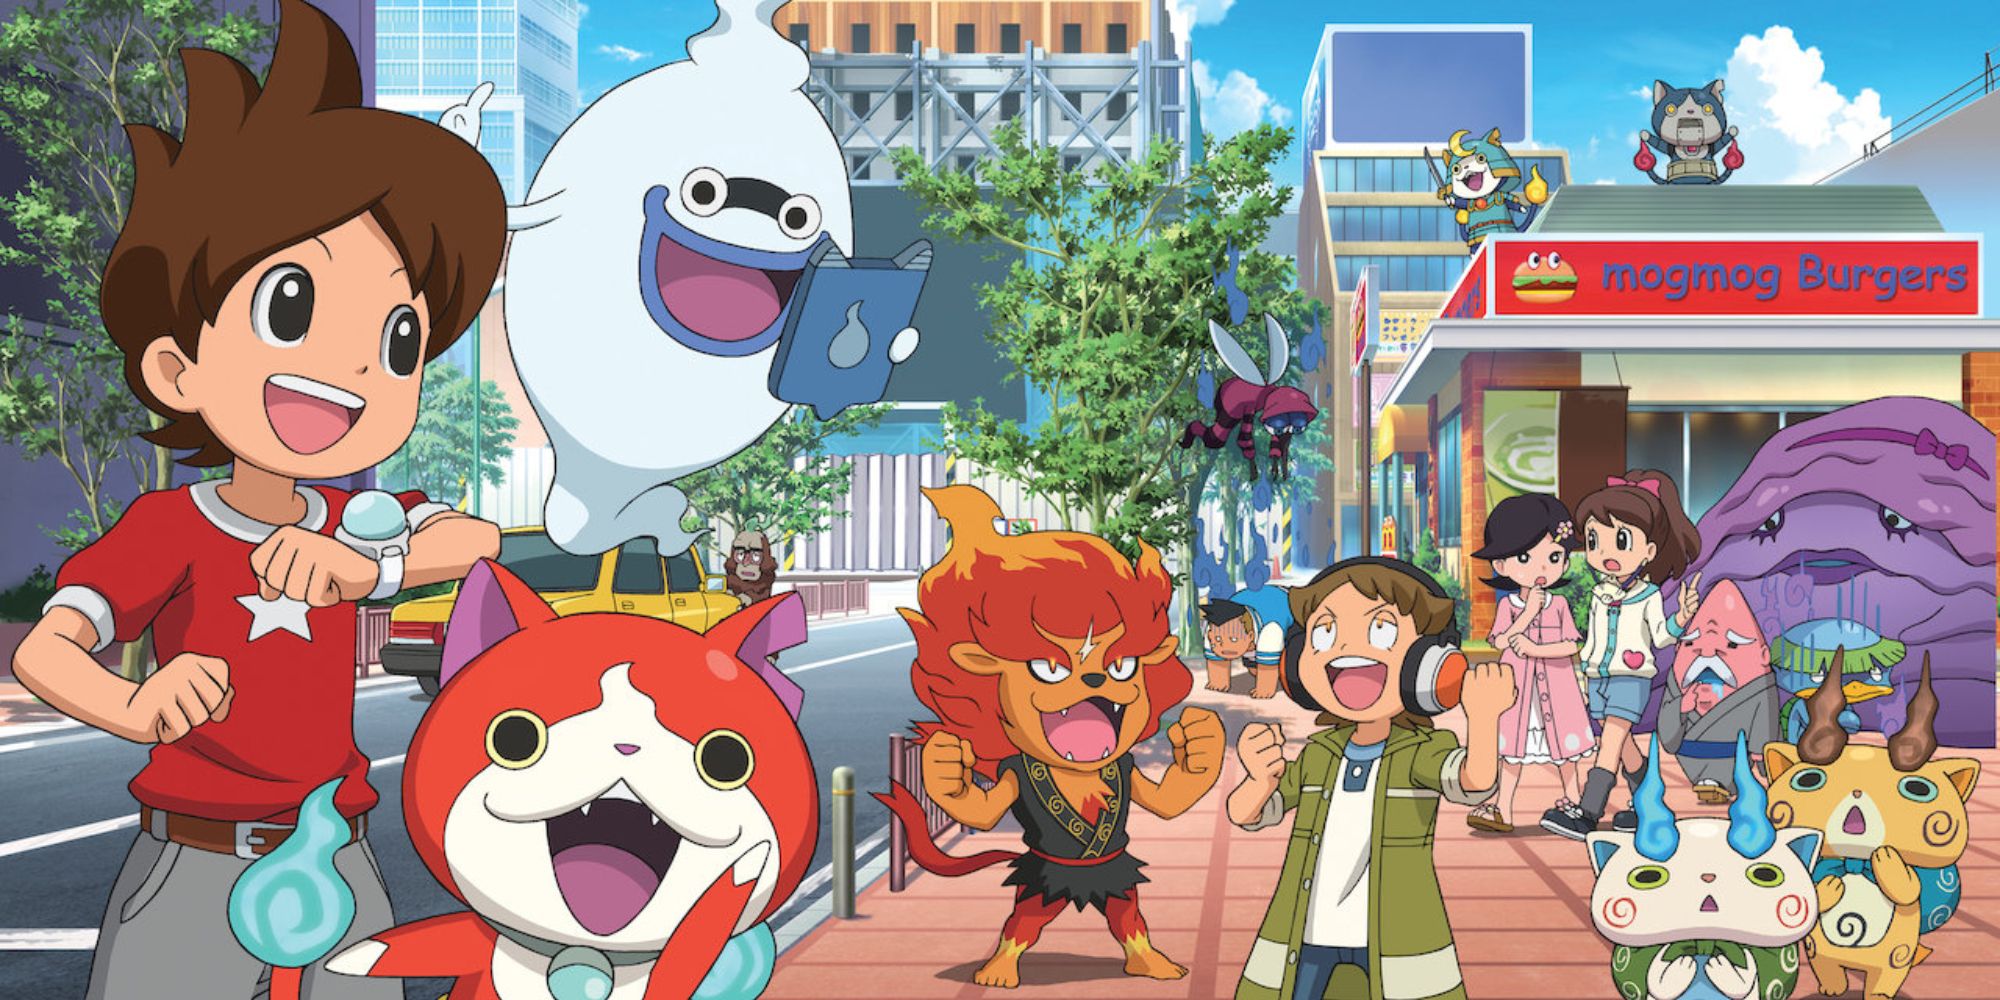 Games Like Studio Ghibli Nathan, Edward, Jibanyan and Whisper stood on a city street surrounded by spirits in front of a burger shop